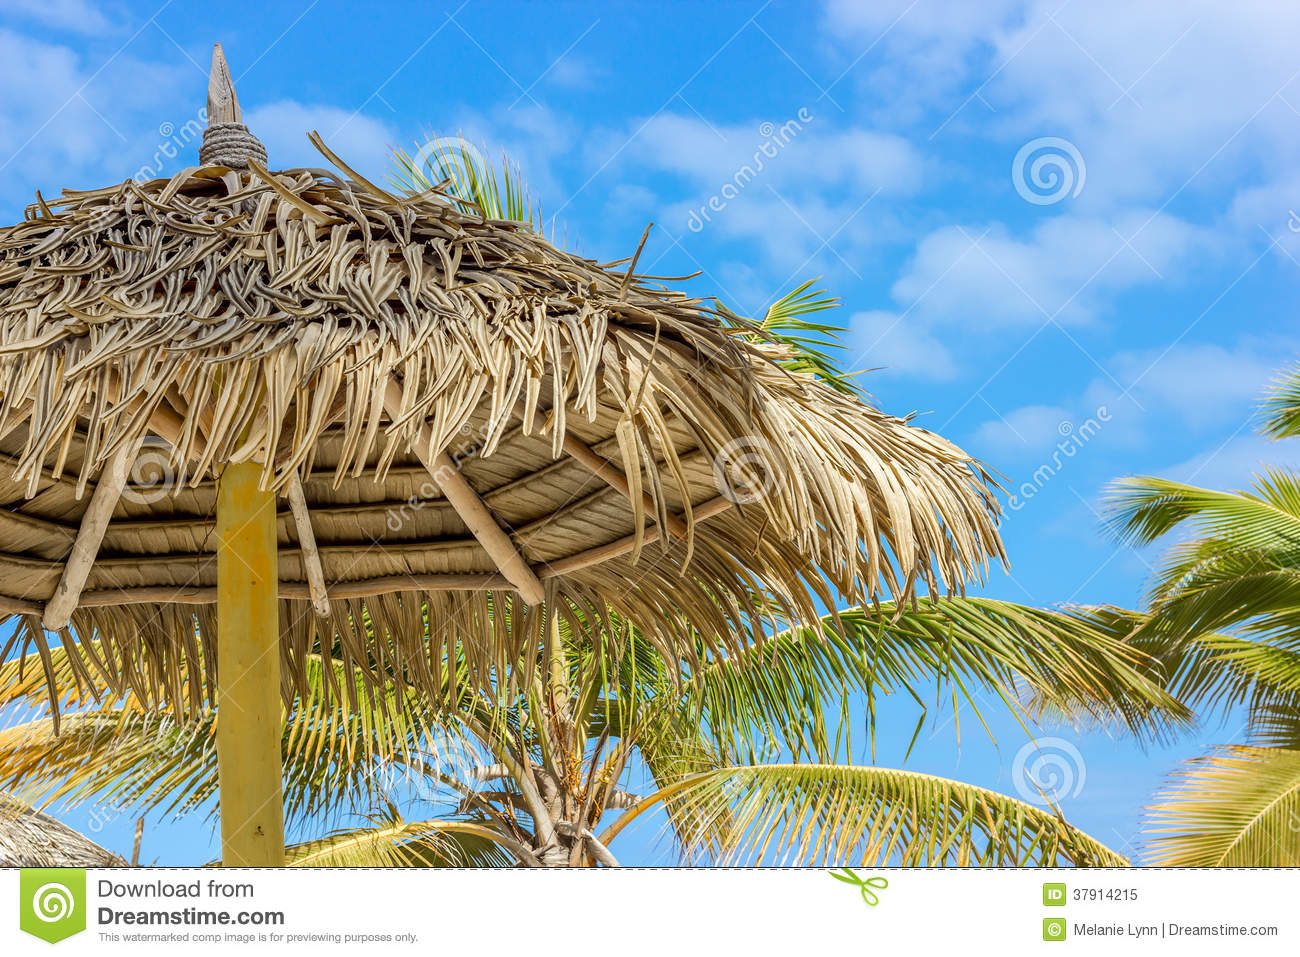 Tiki Hut Umbrella With Dried Palm Leaves For Roof With Beautiful Blue